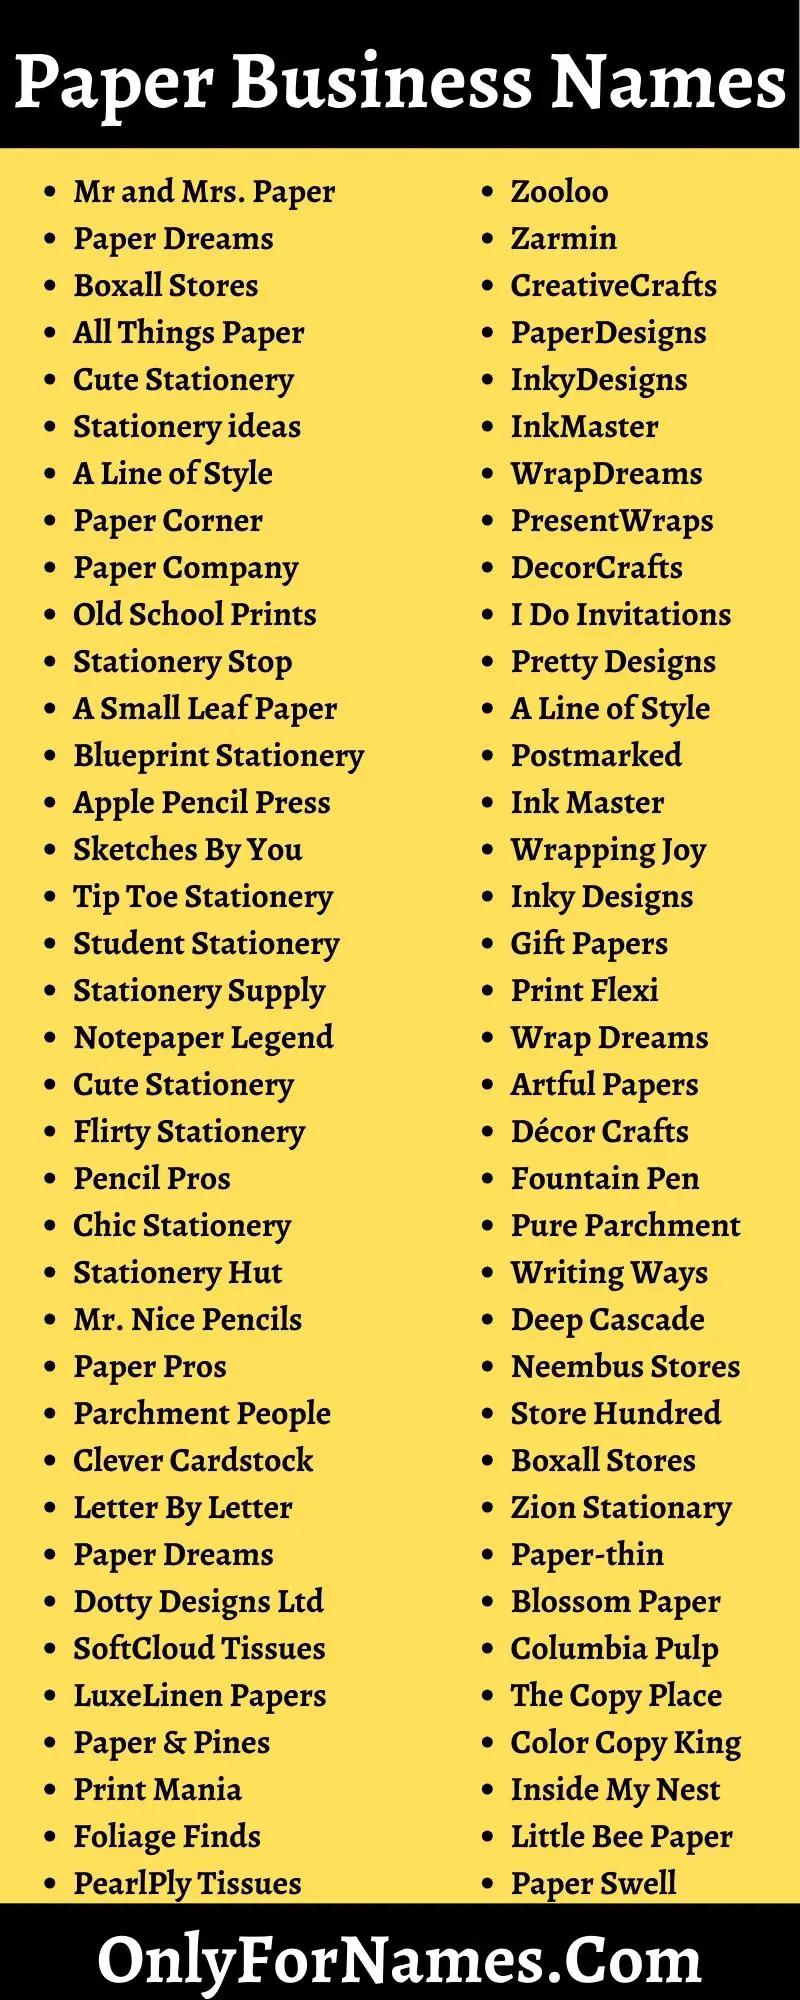 Paper Business Names